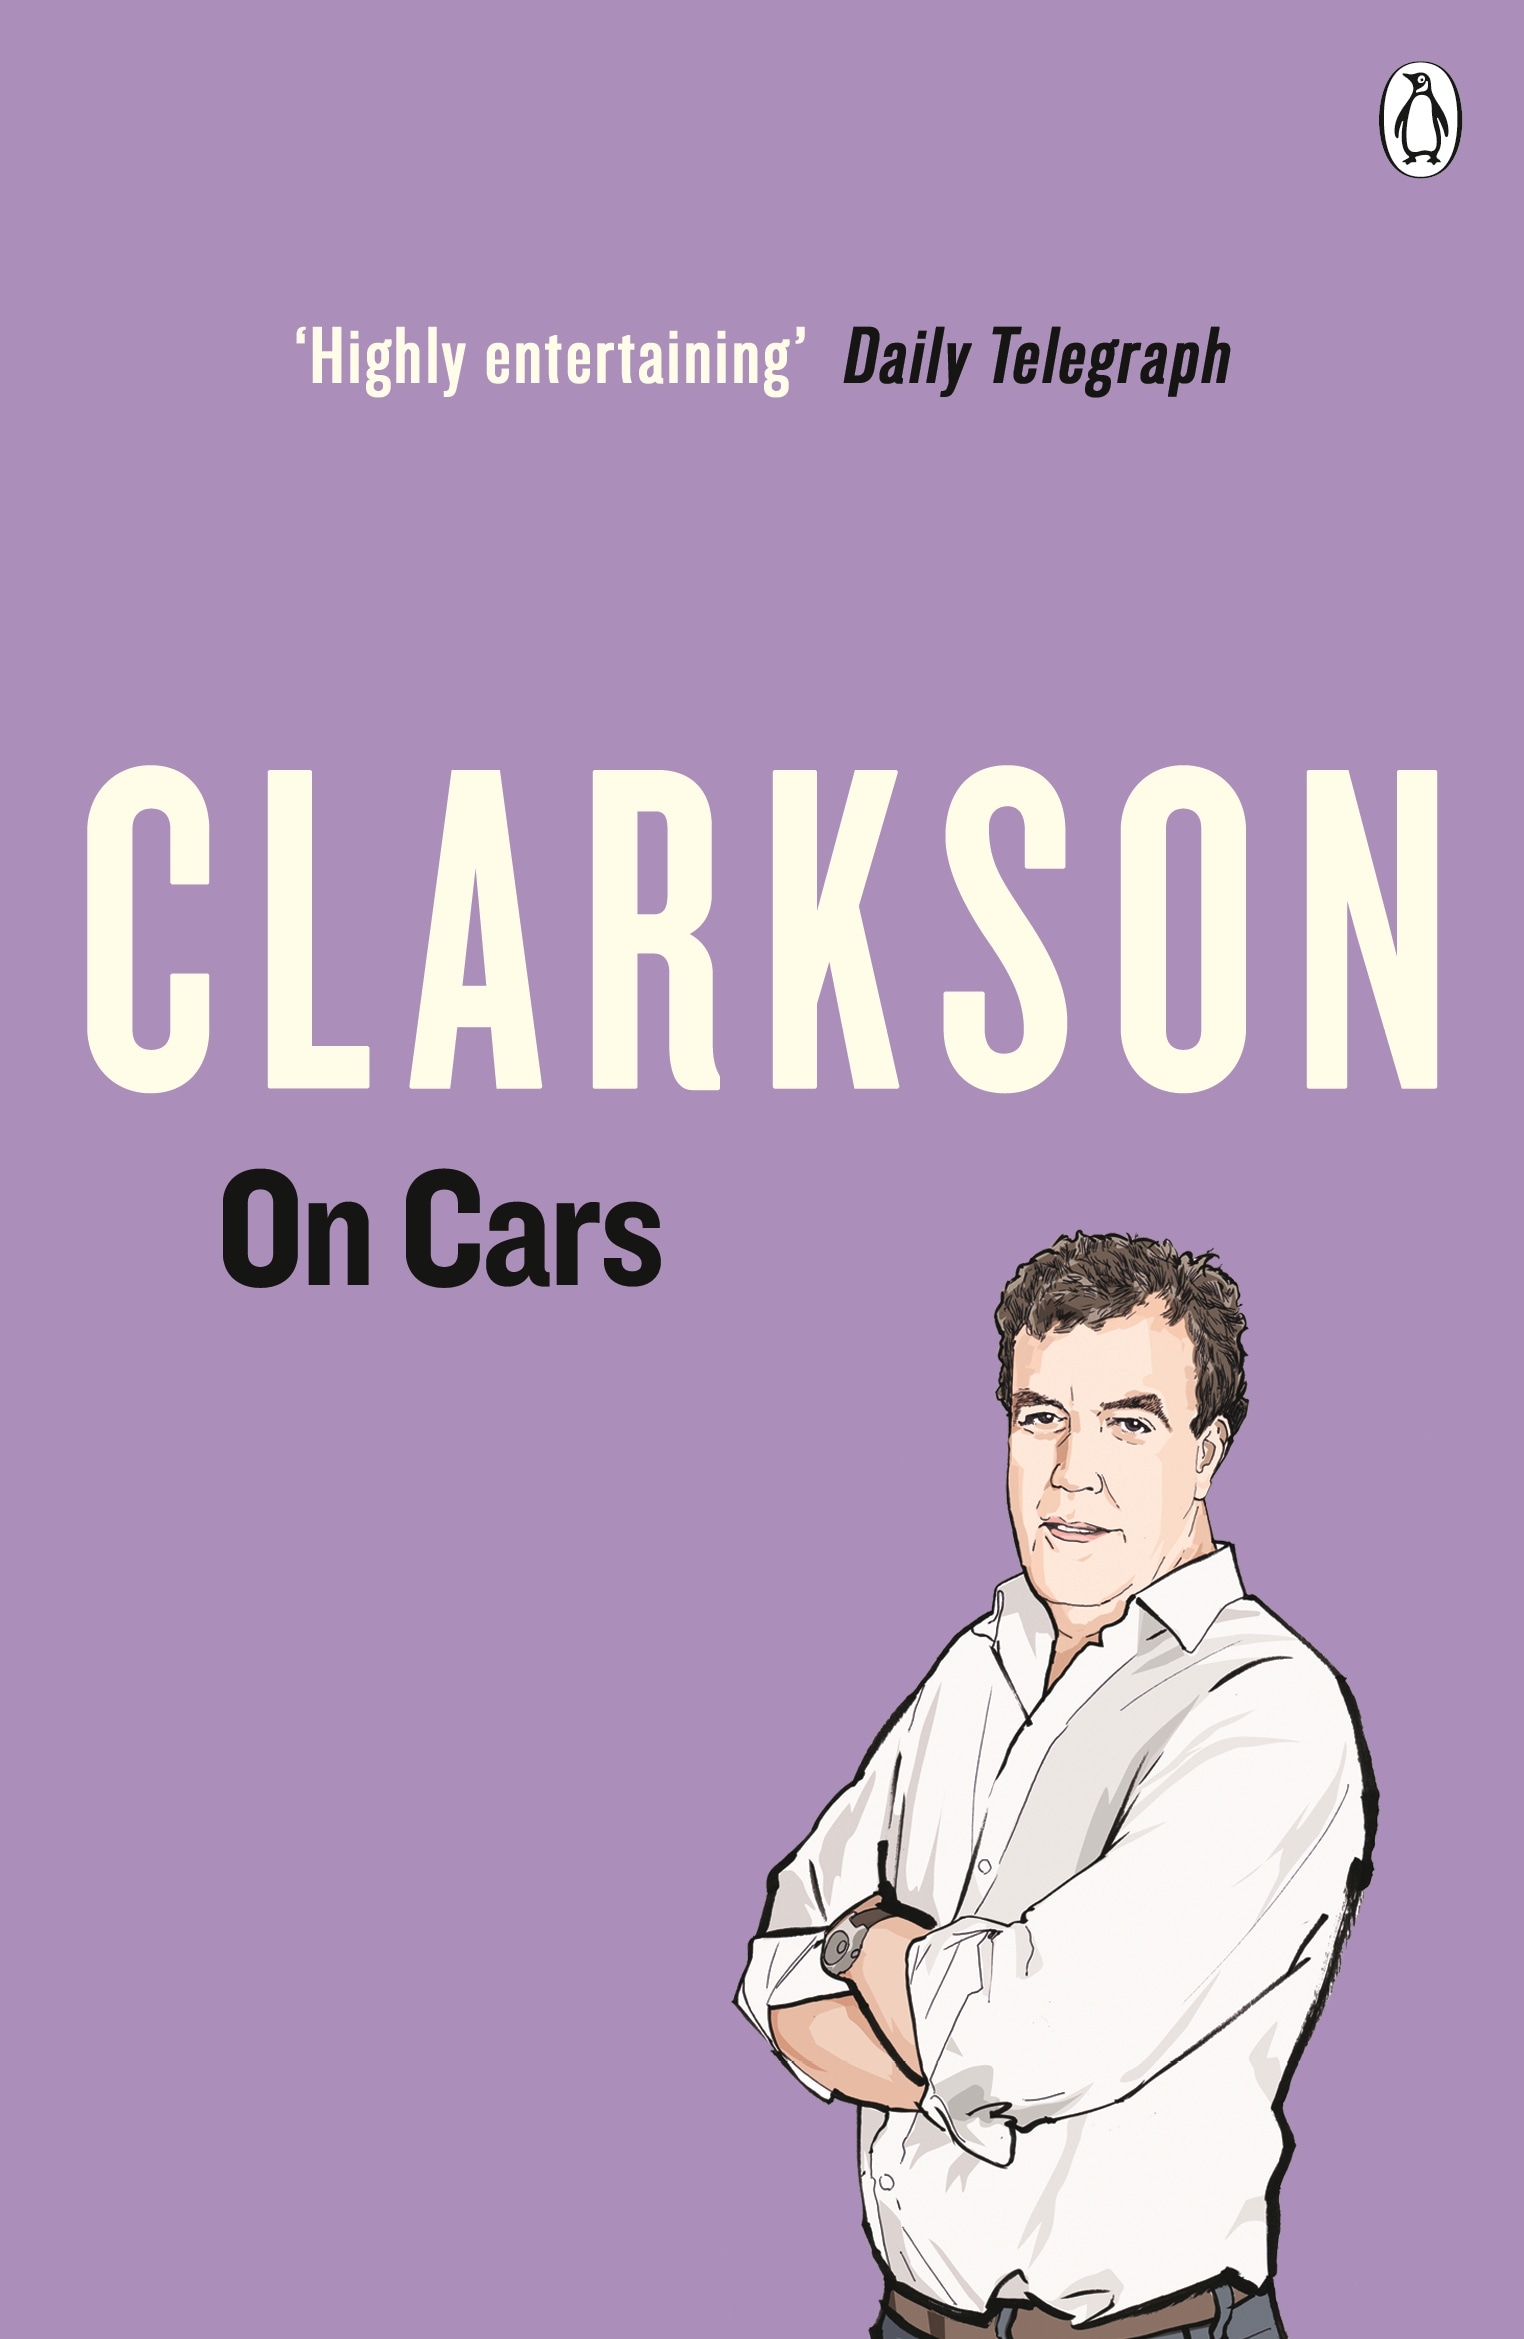 Book “Clarkson on Cars” by Jeremy Clarkson